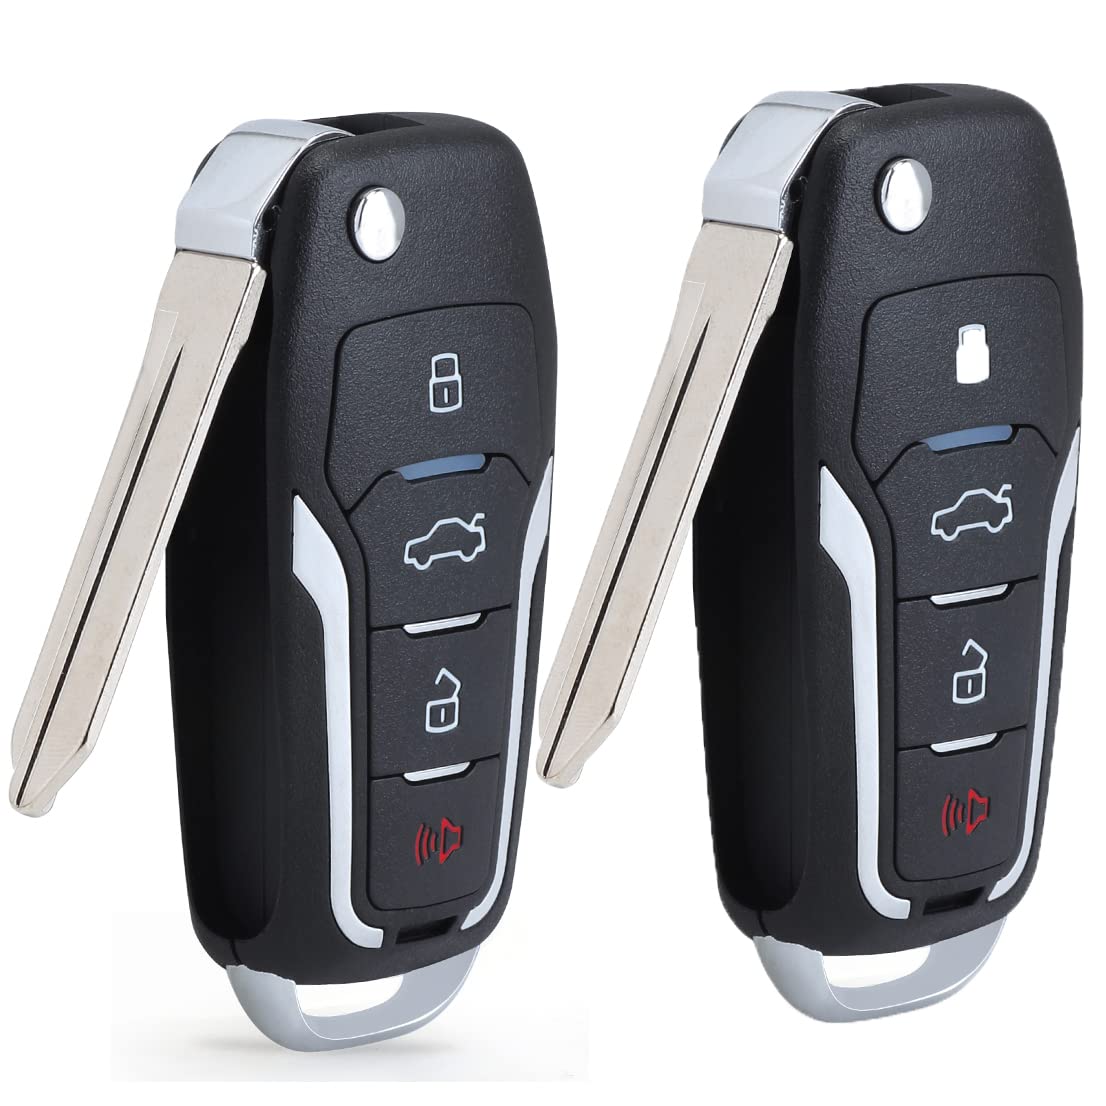 Can I program a new Ford car key without the original key?